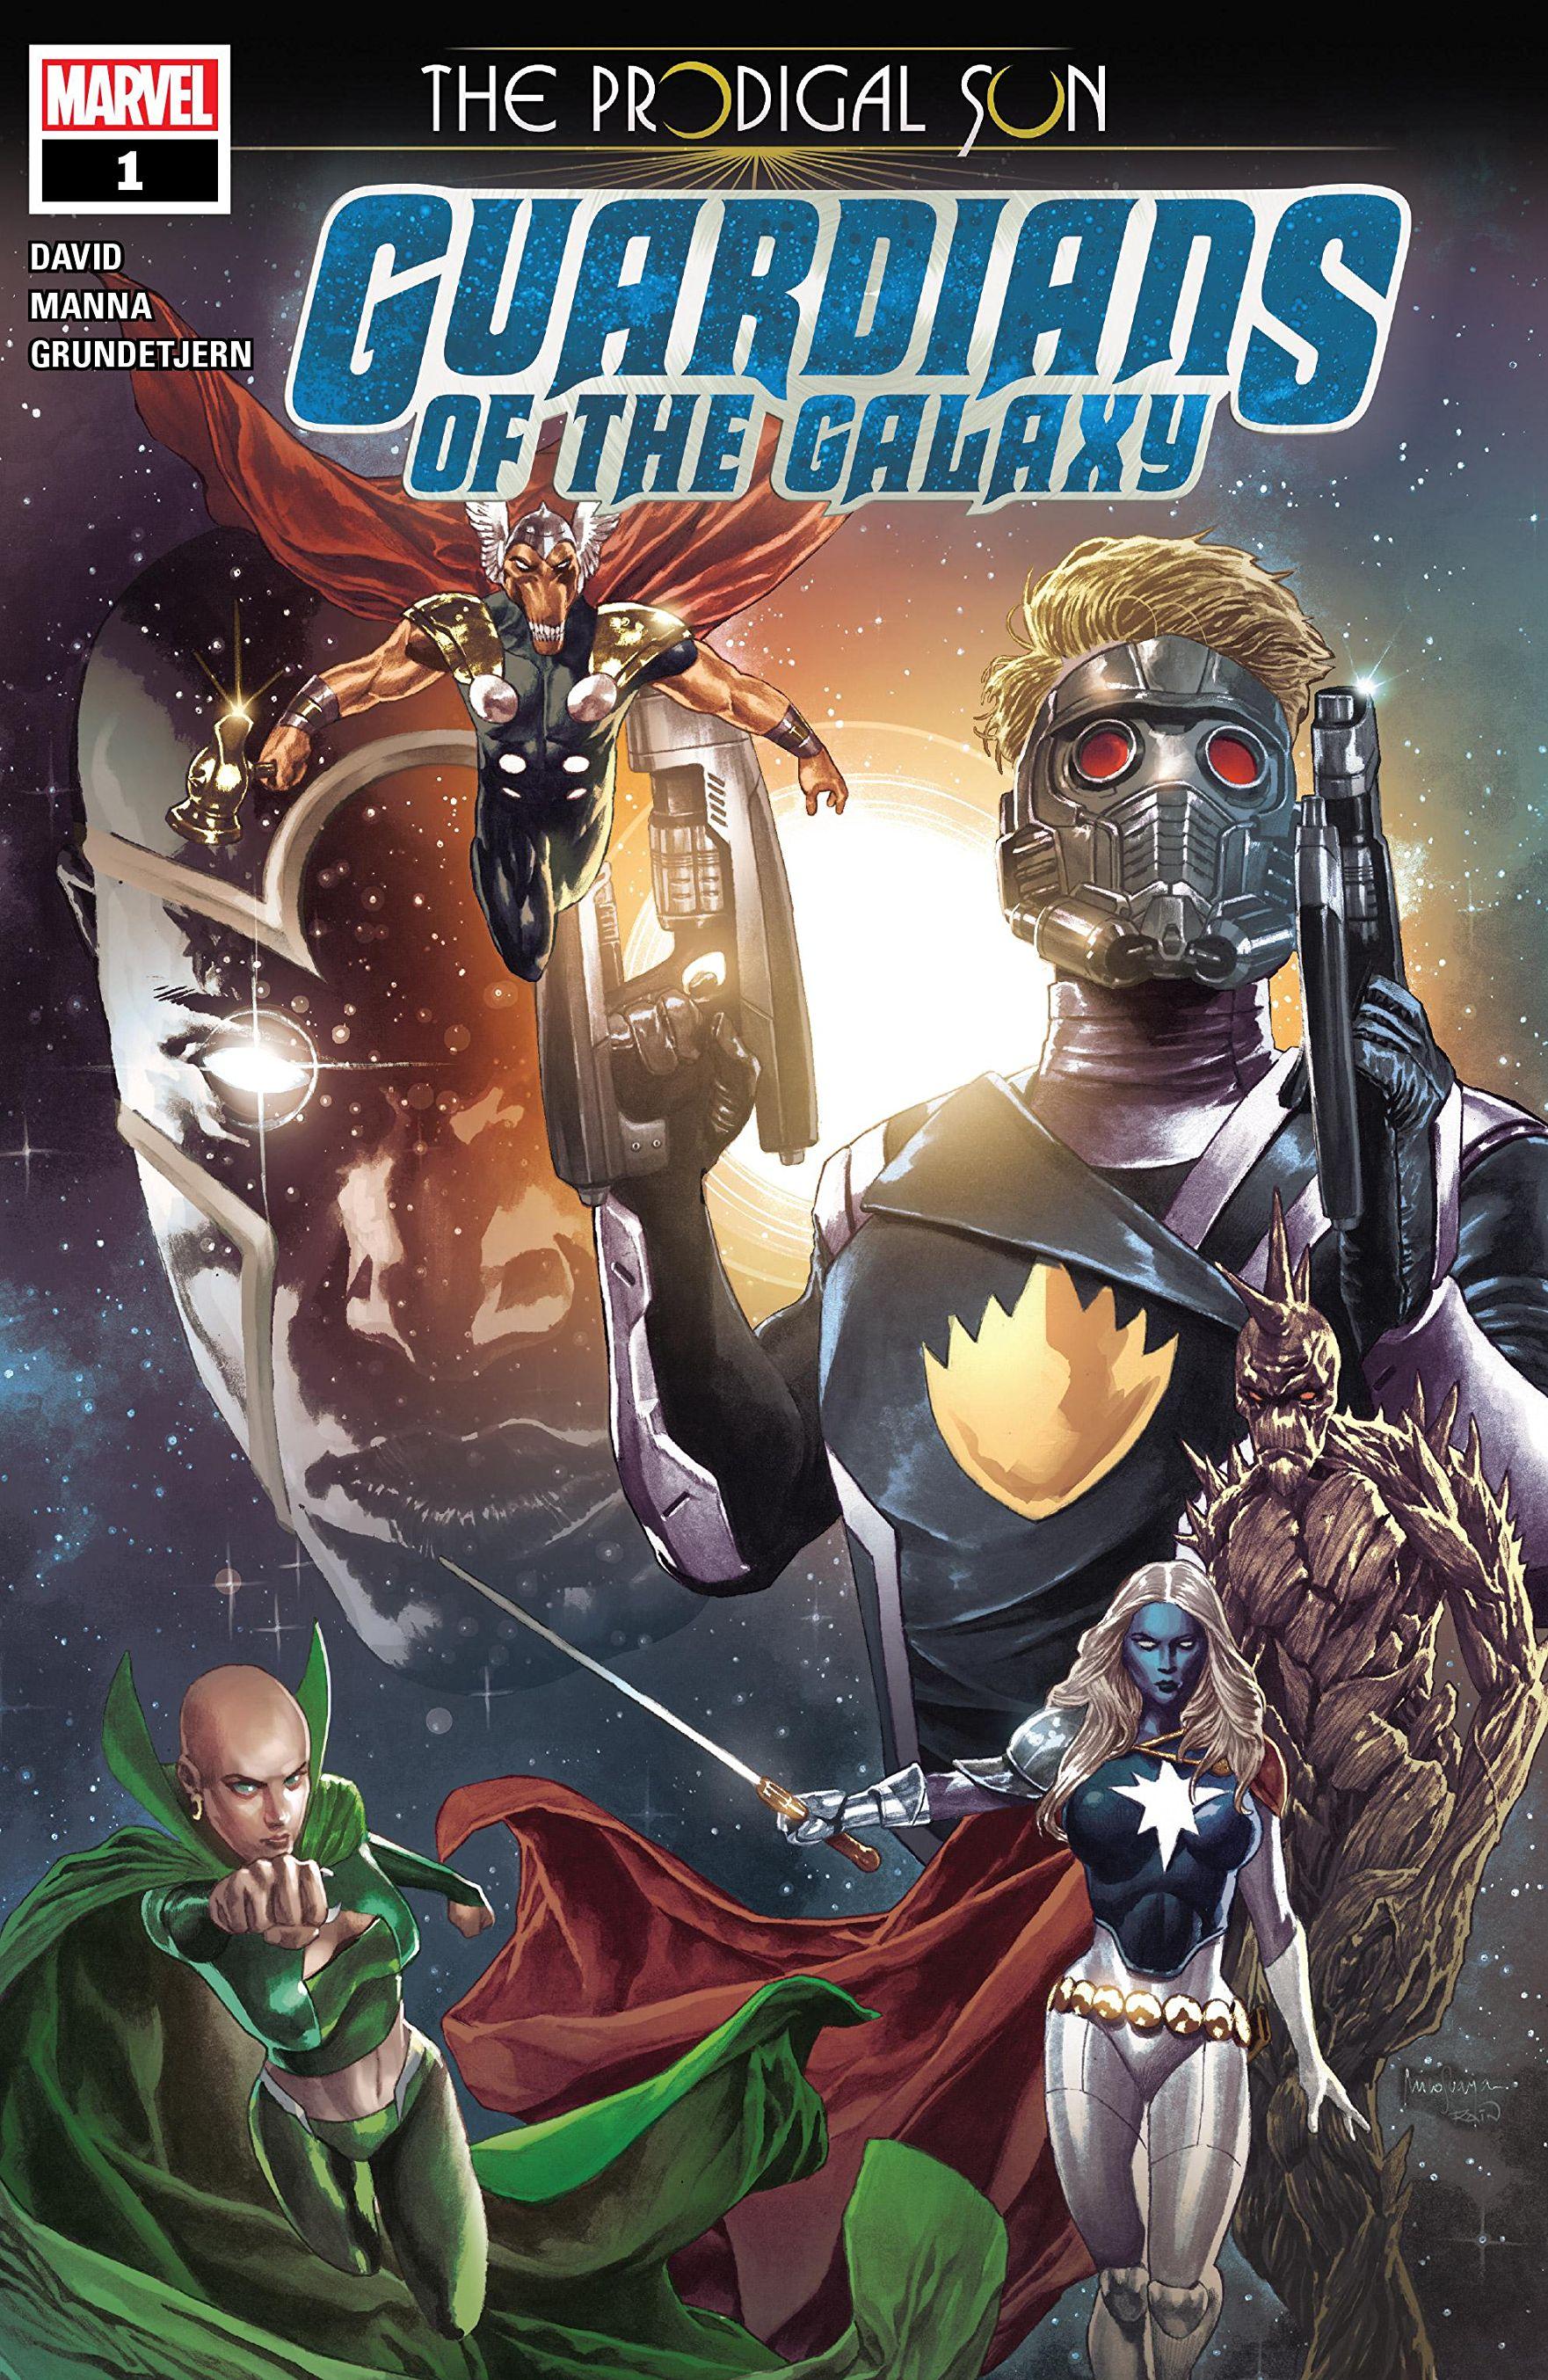 Guardians of the Galaxy: The Prodigal Sun Vol. 1 #1